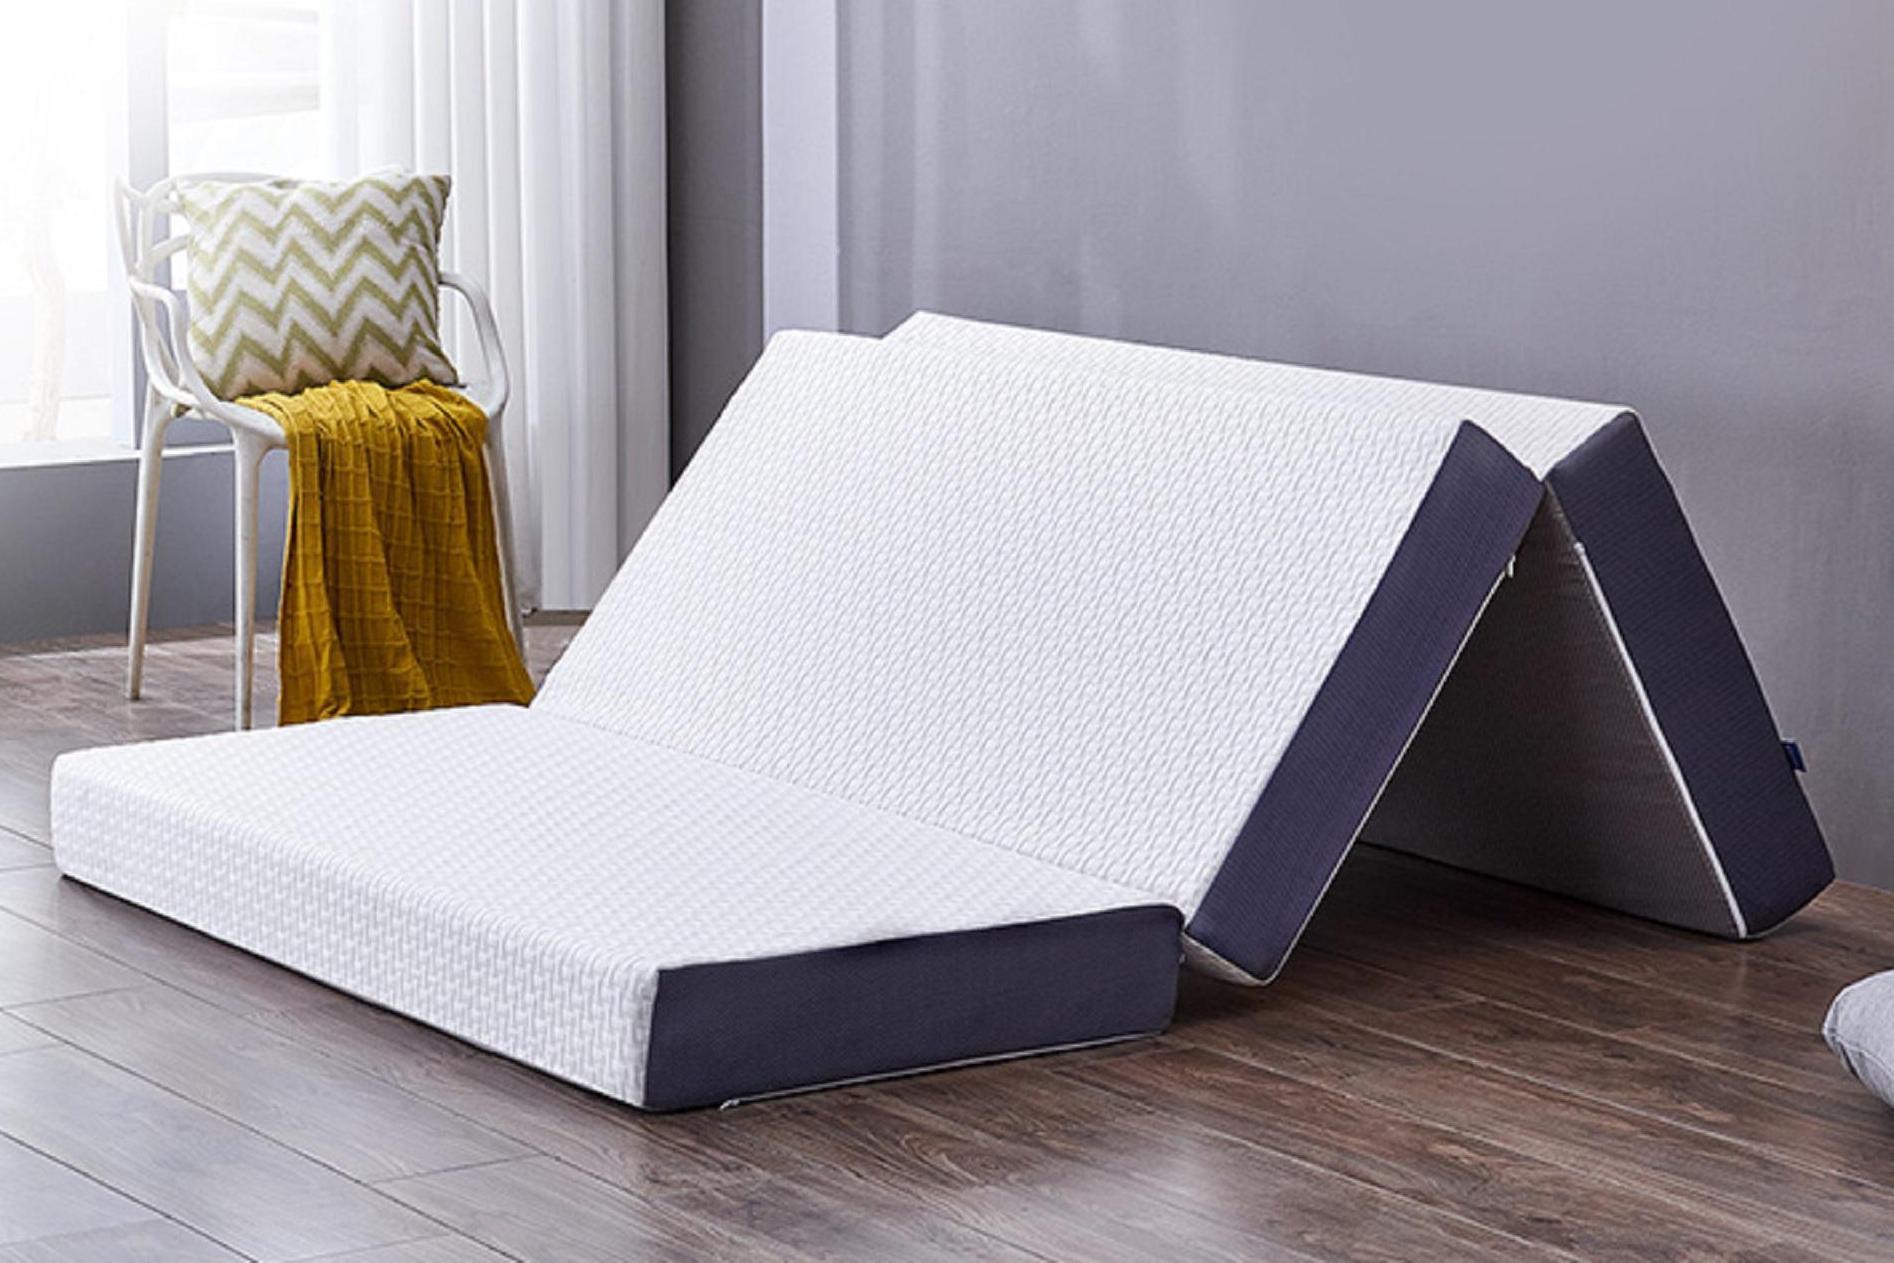 Best Foldable Mattresses of 2022: A Complete & Unbiased Buyer’s Guide